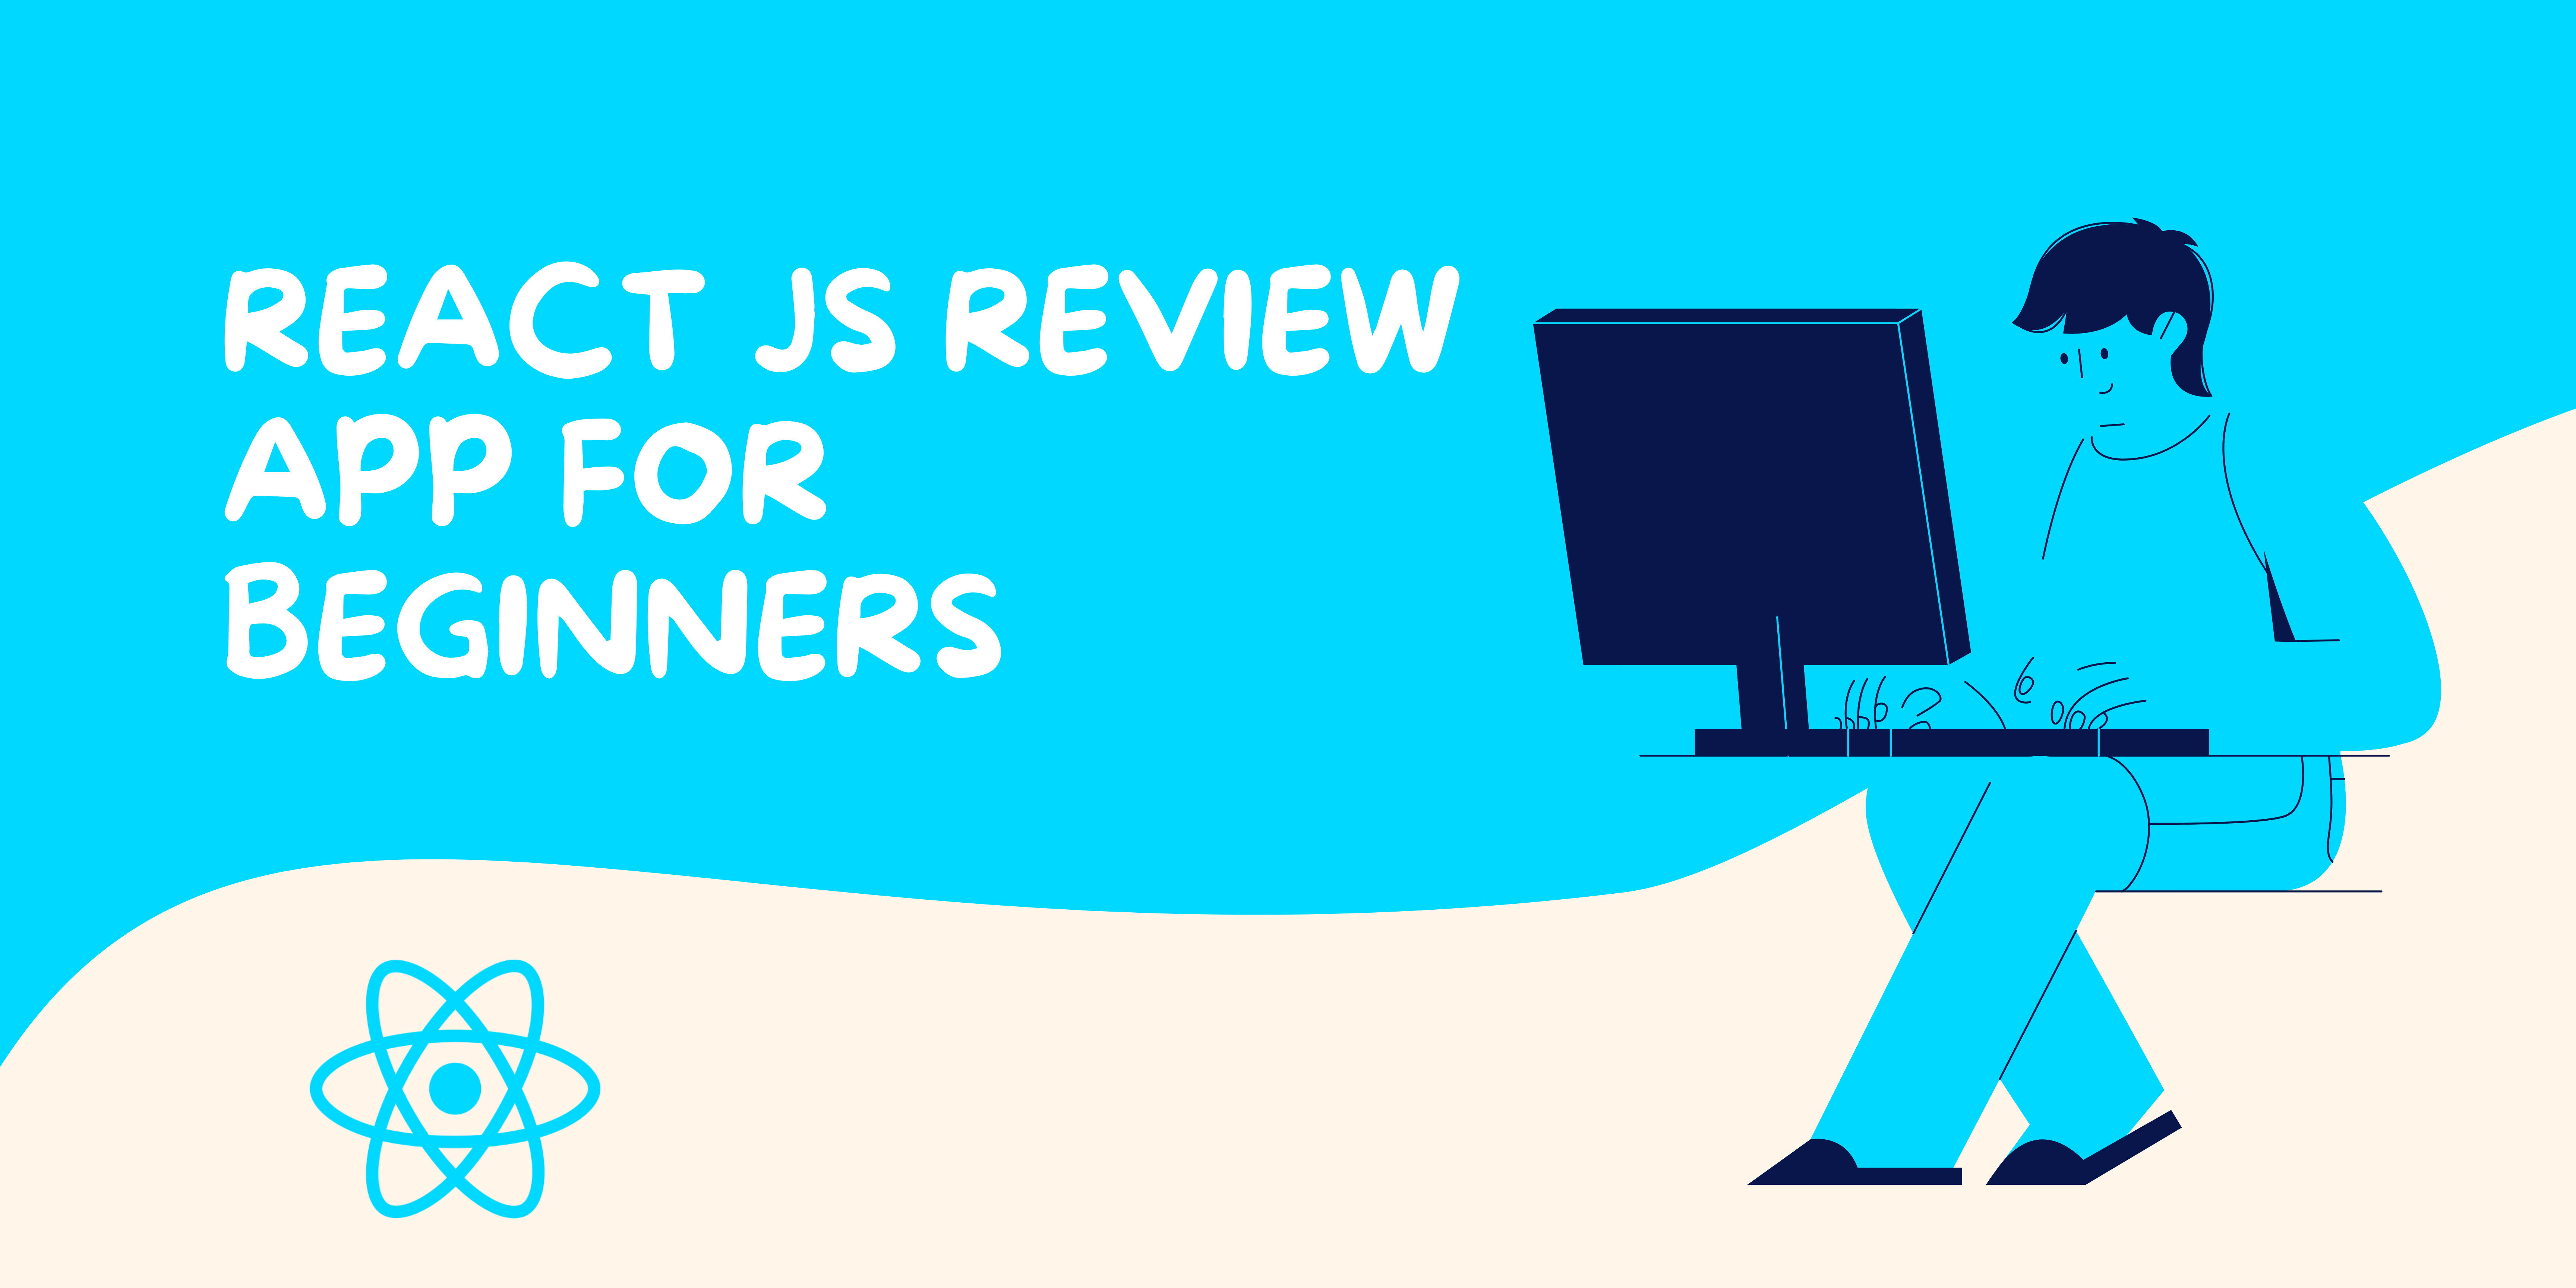 React js Review App for Beginners